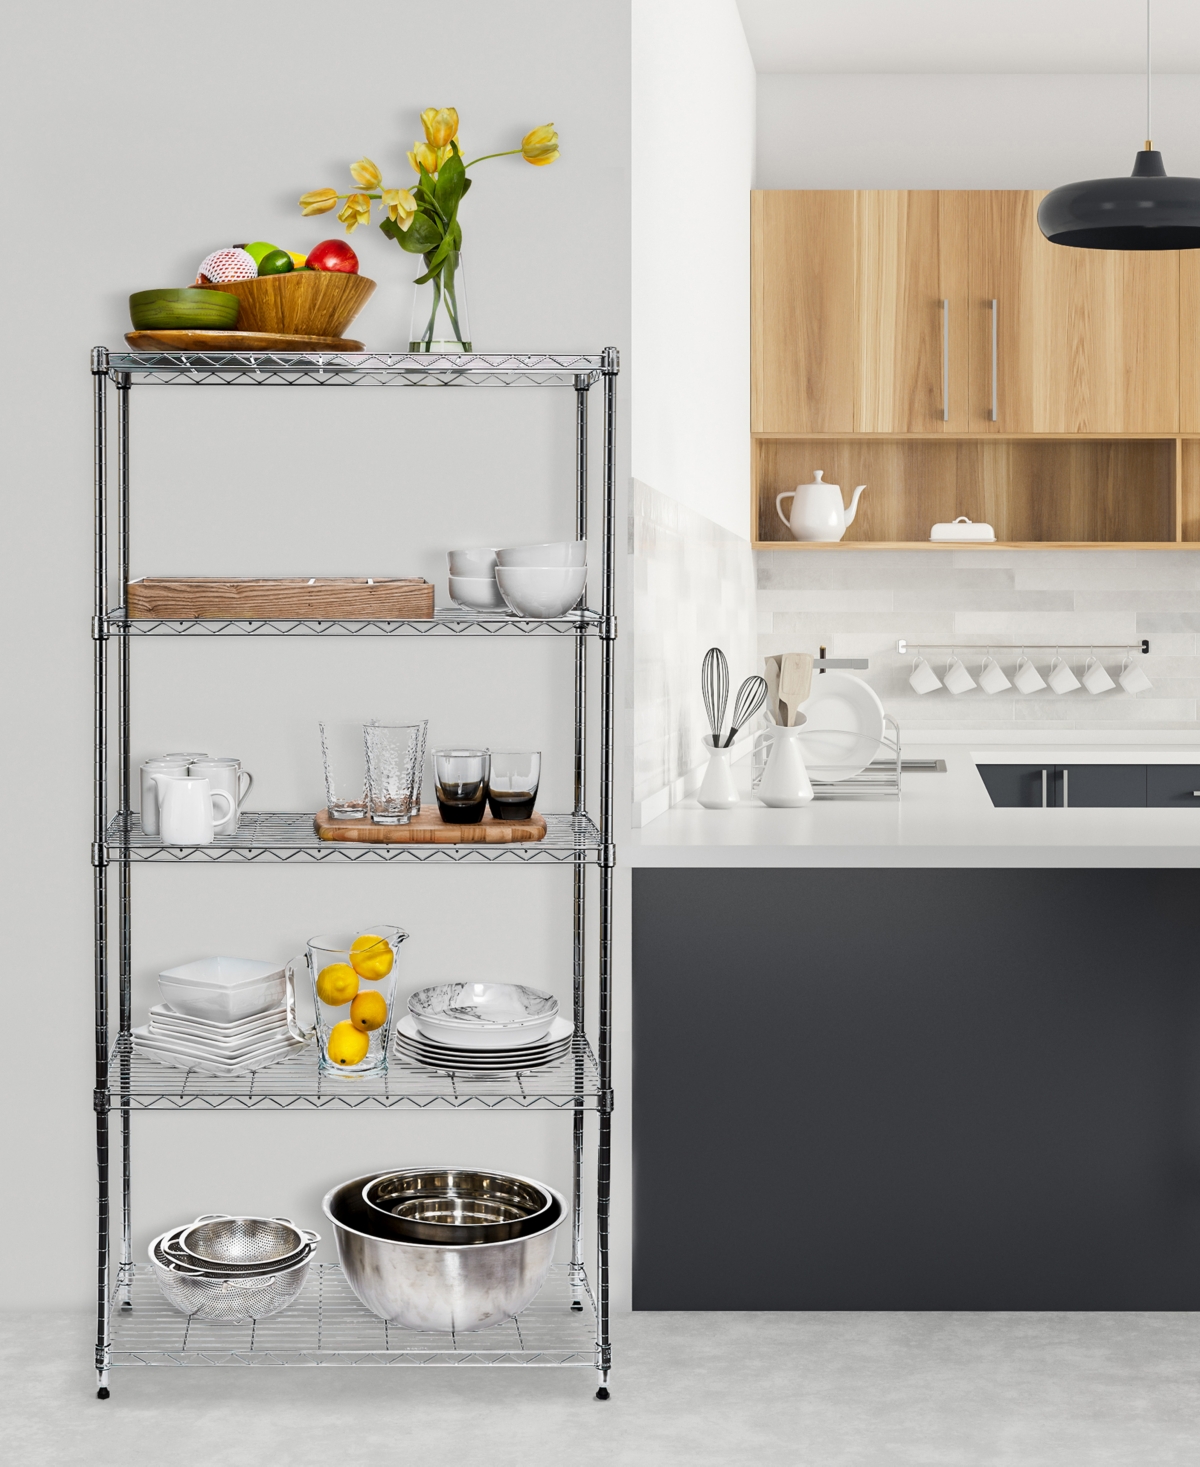 Shop Seville Classics 5-tier Steel Wire Wheeled Shelving In Chrome